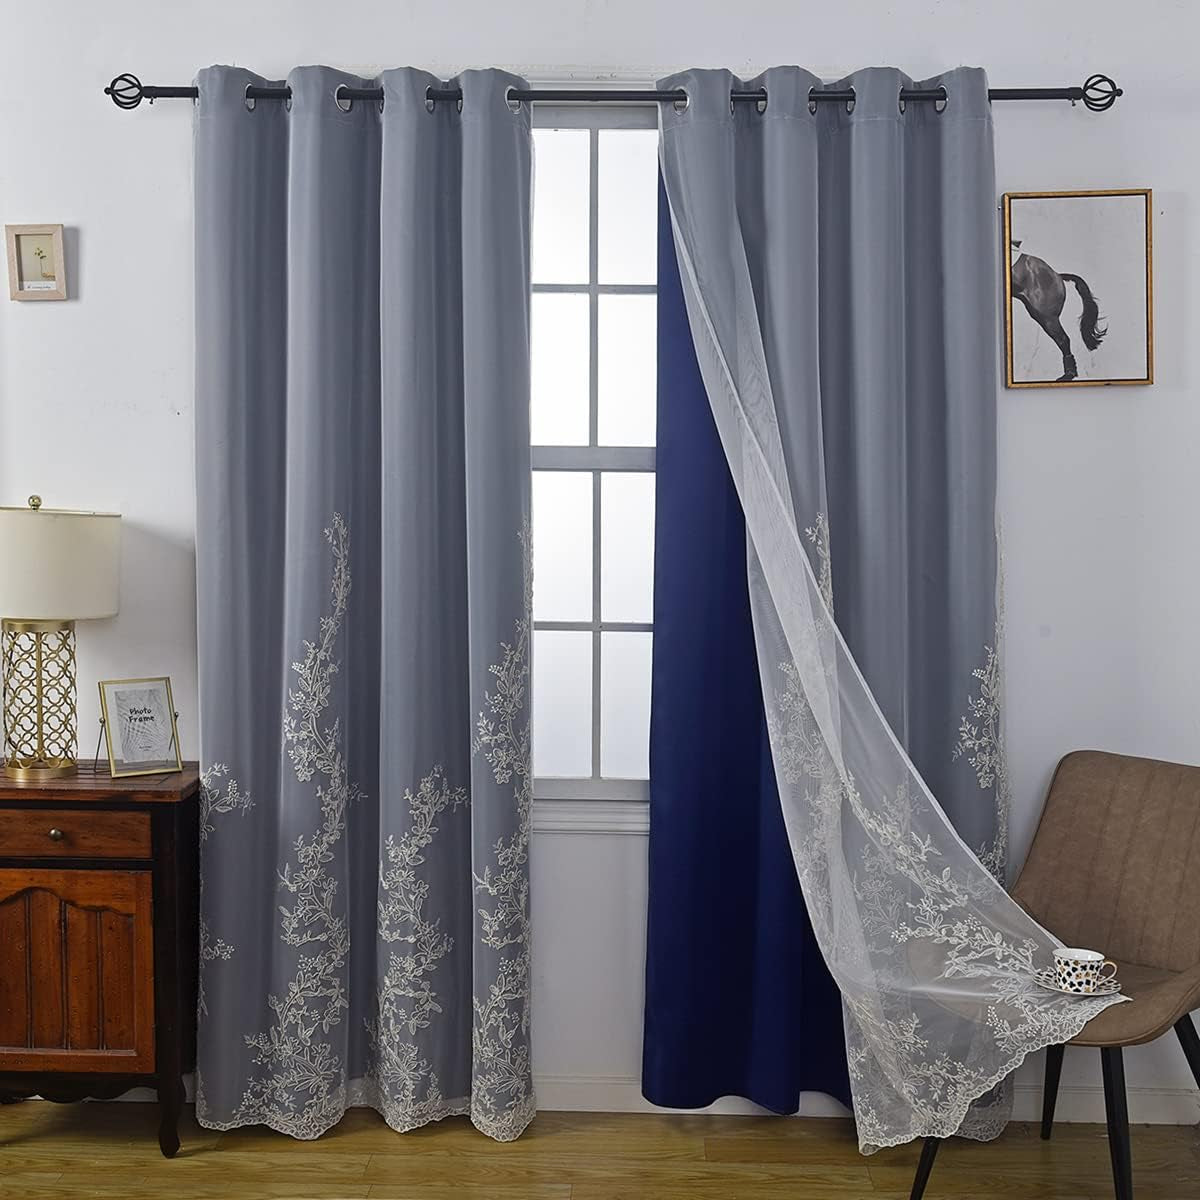 GYROHOME Double Layered Curtains with Embroidered White Sheer Tulle, Mix and Match Curtains Room Darkening Grommet Top Thermal Insulated Drapes,2Panels,52X84Inch,Beige  GYROHOME Navy 52Wx63Lx2 